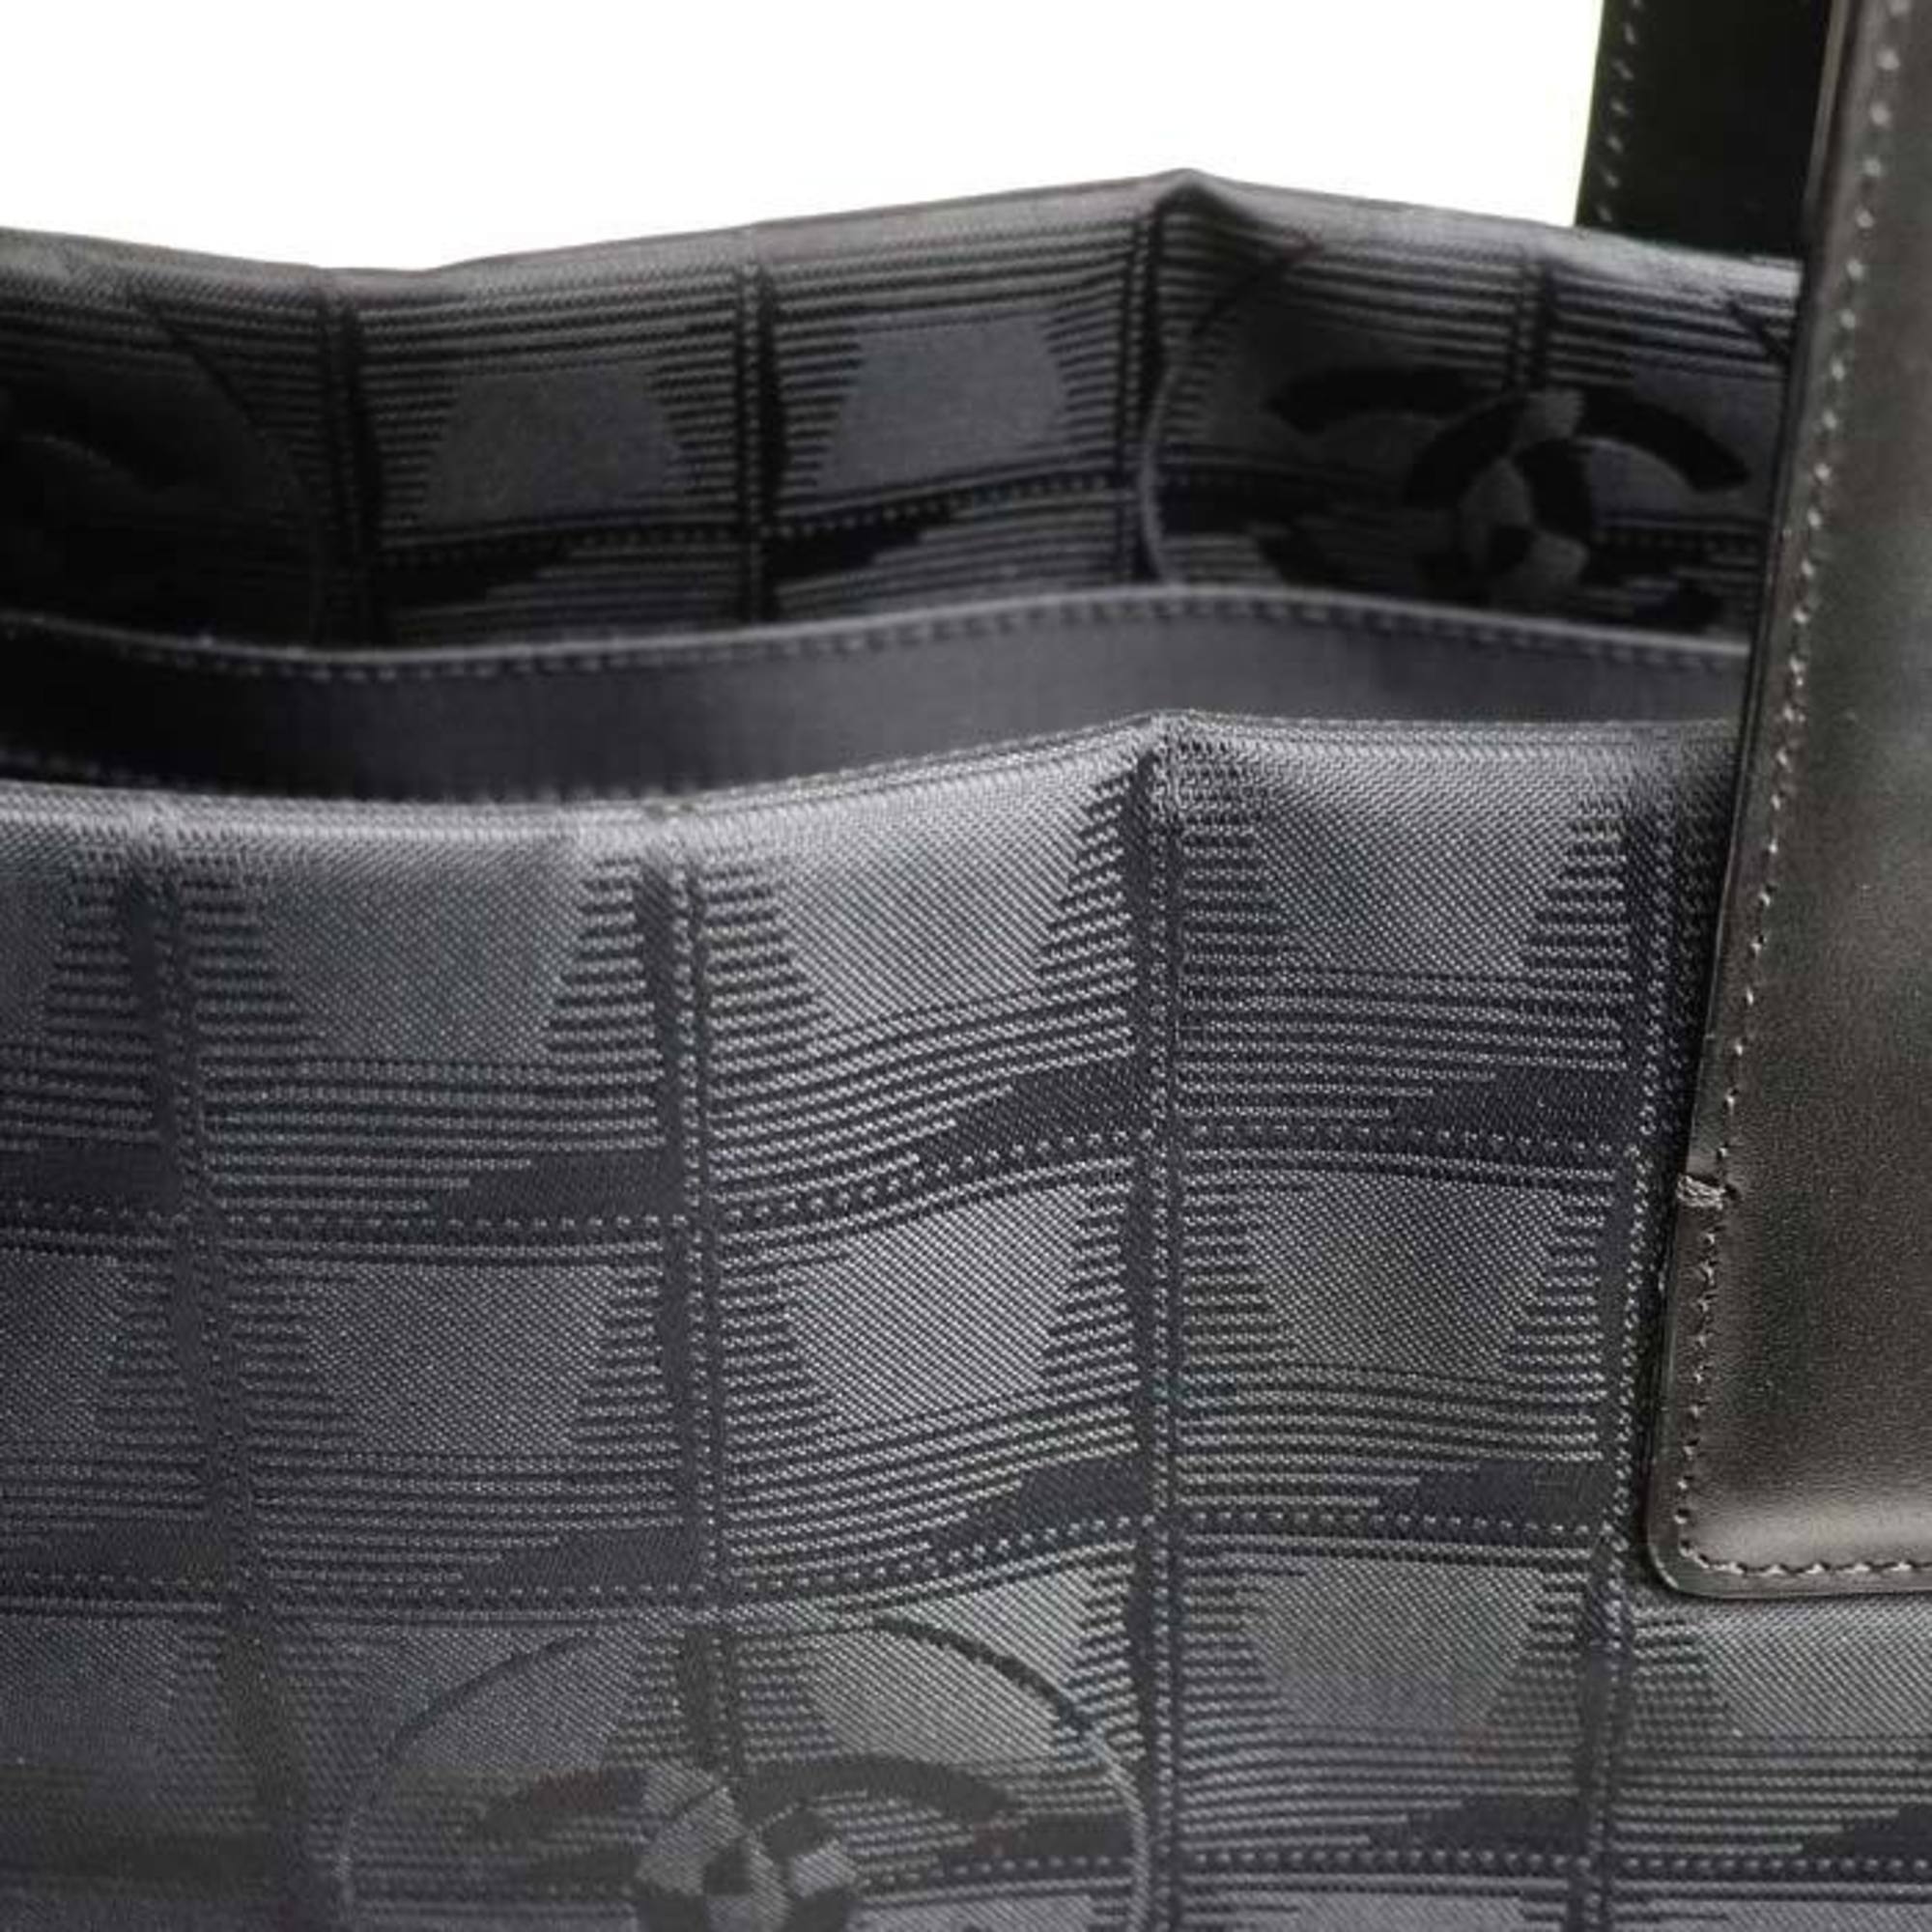 CHANEL New Travel Line Tote MM Bag Black A15991 Women's